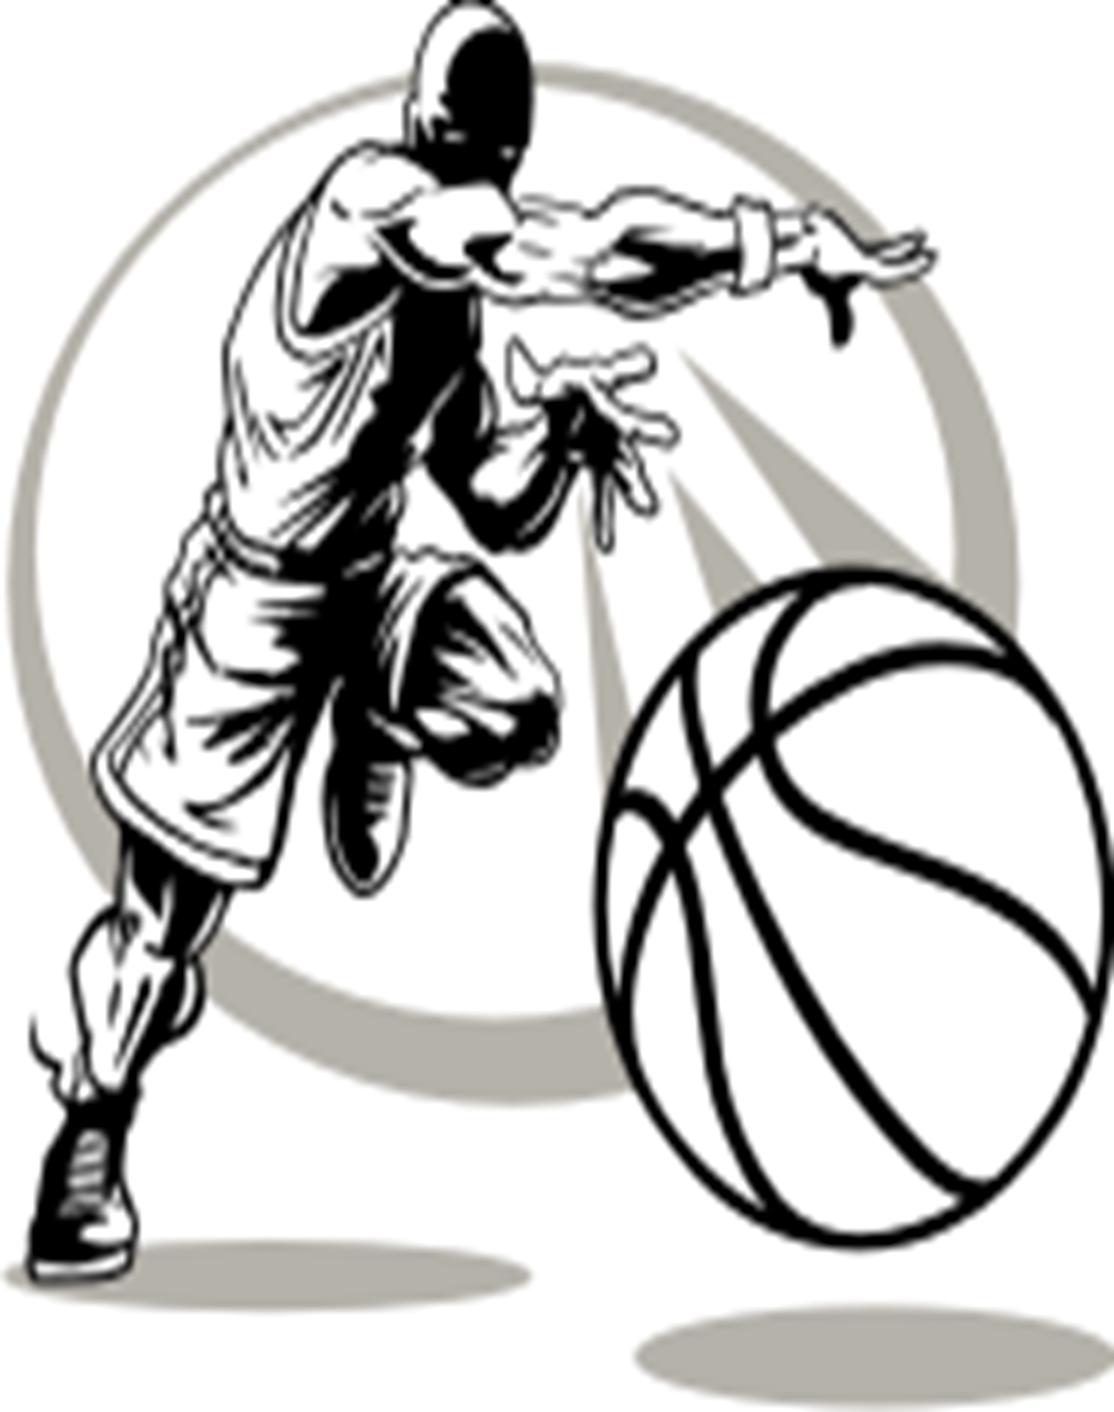 Basketball clip art logo clipart pictures image